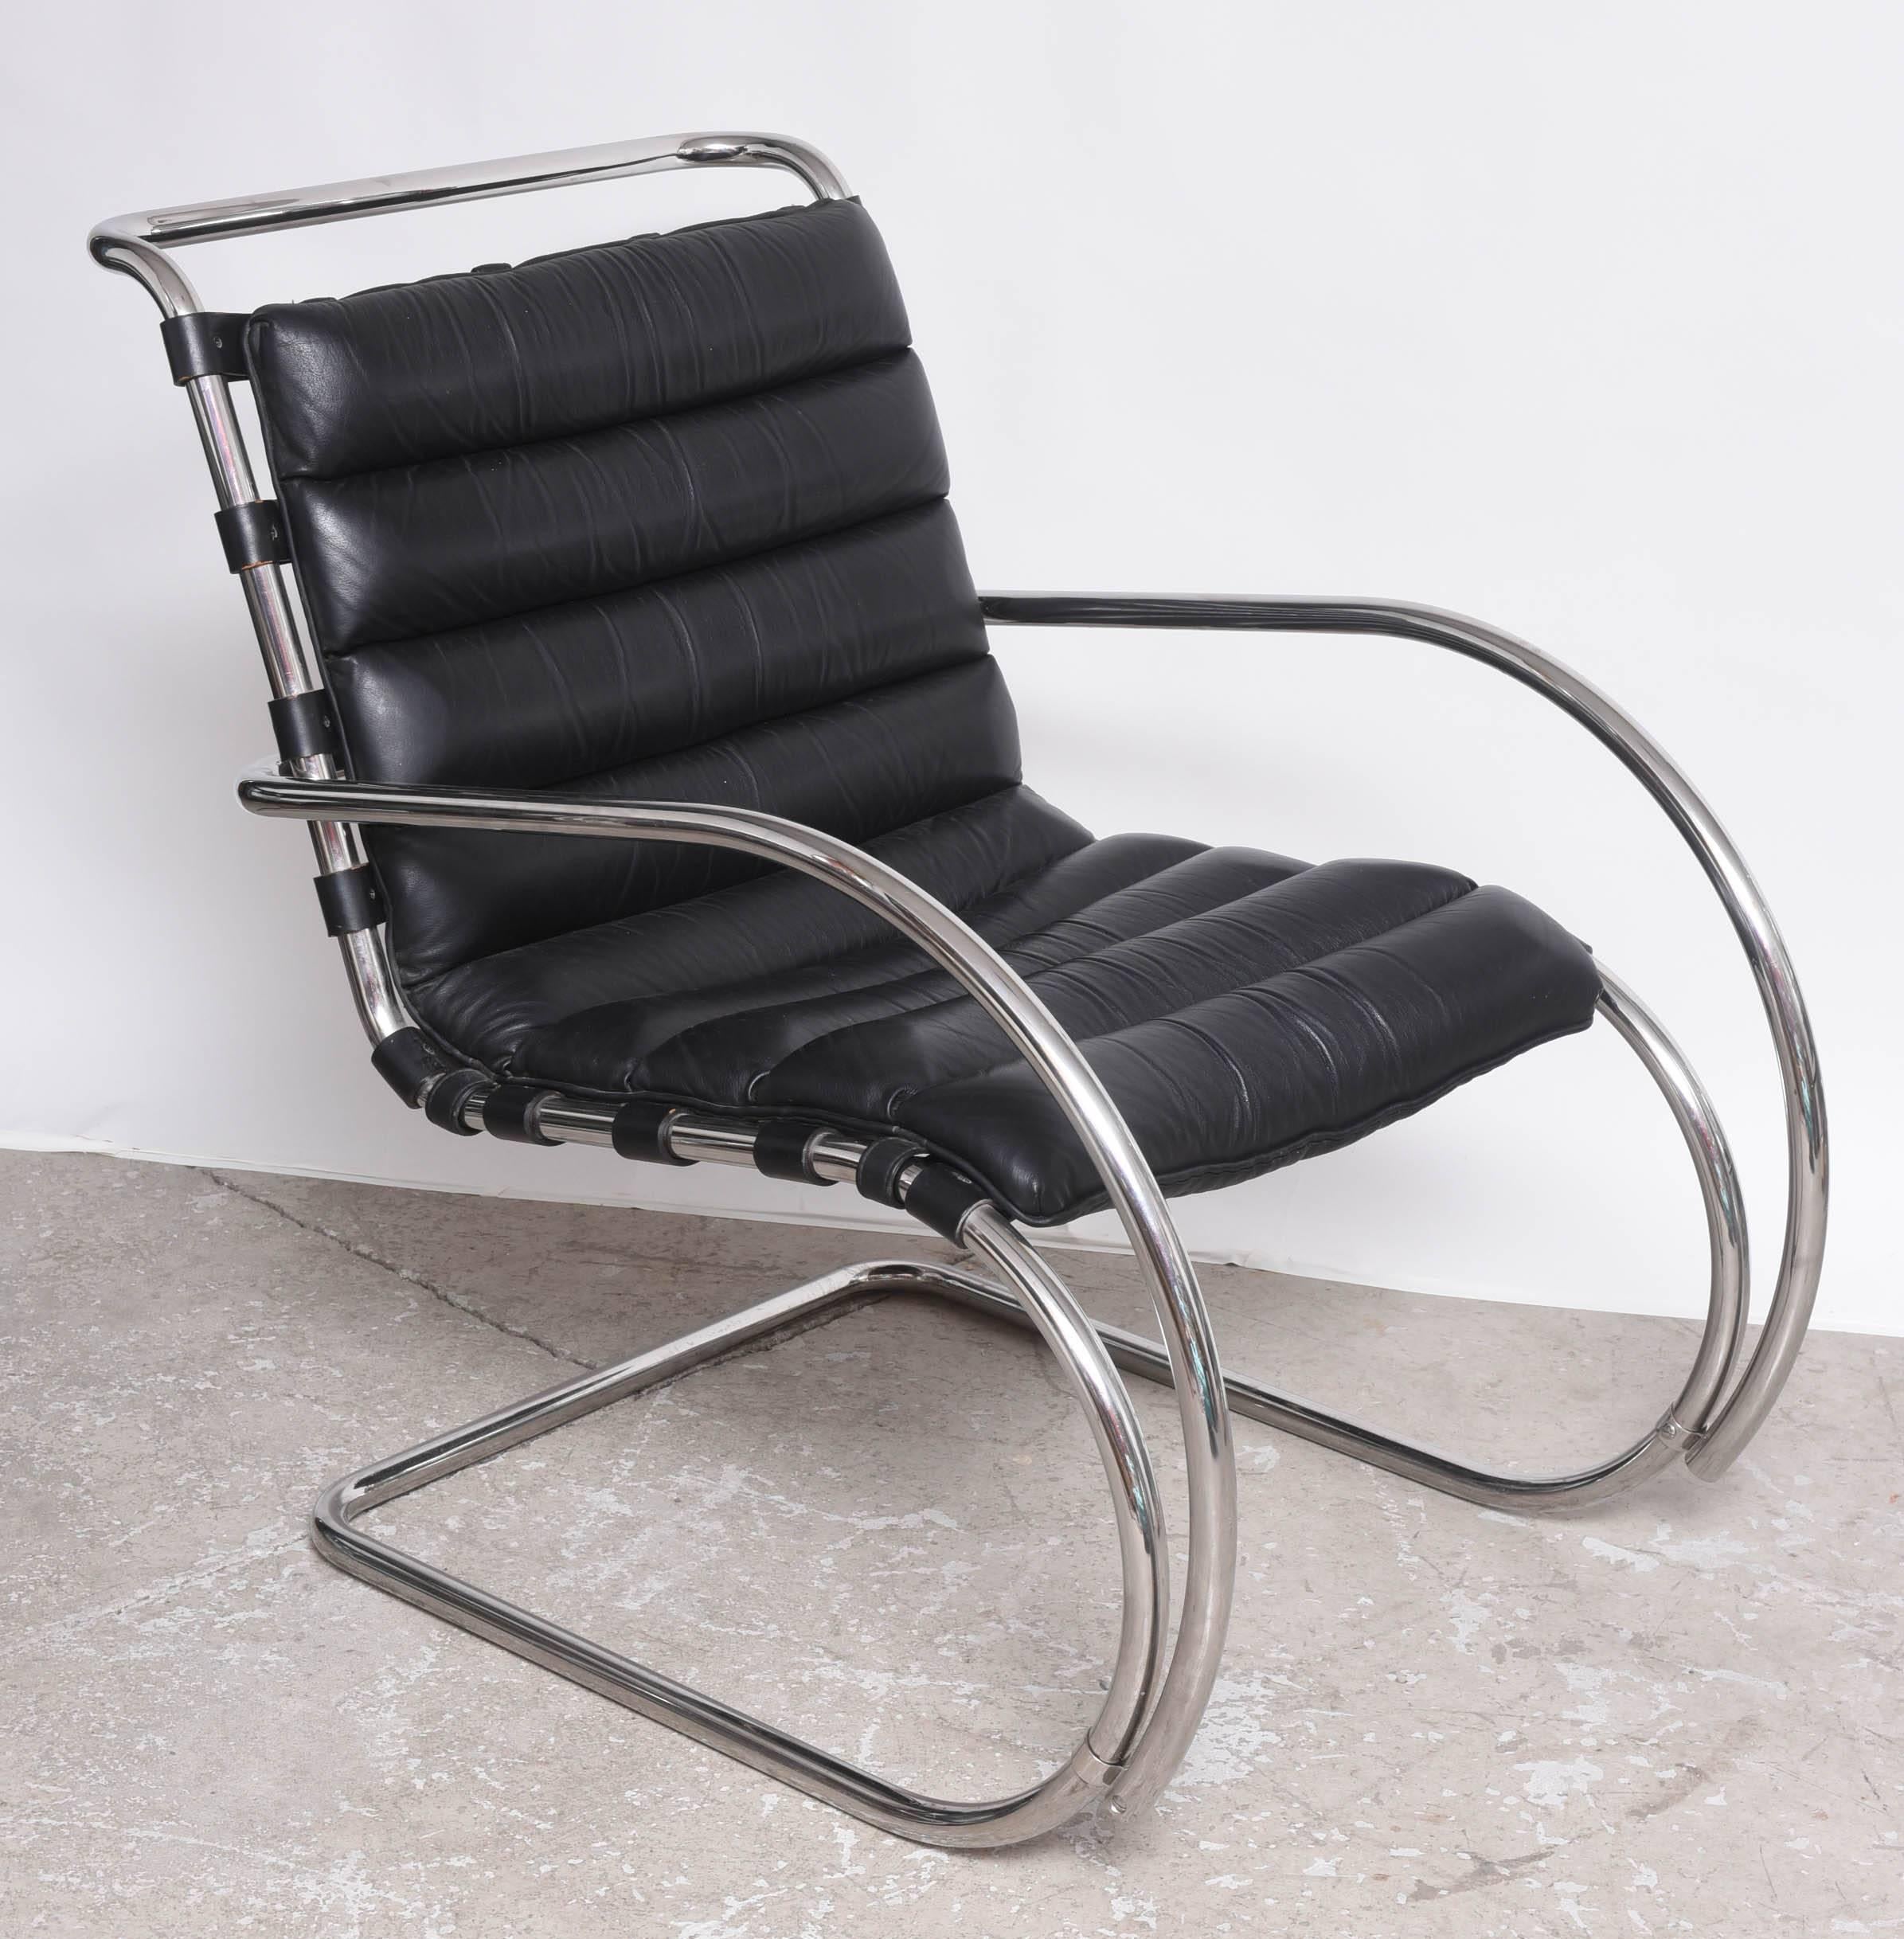 Beautiful all original condition Knoll Mr. 40 lounge chairs designed by Ludwig Mies van der Rohe in the early thirties. These is a seventies or sixties production. Construction is Chromed Tubular steel and black leather cushions. Minor wear overall